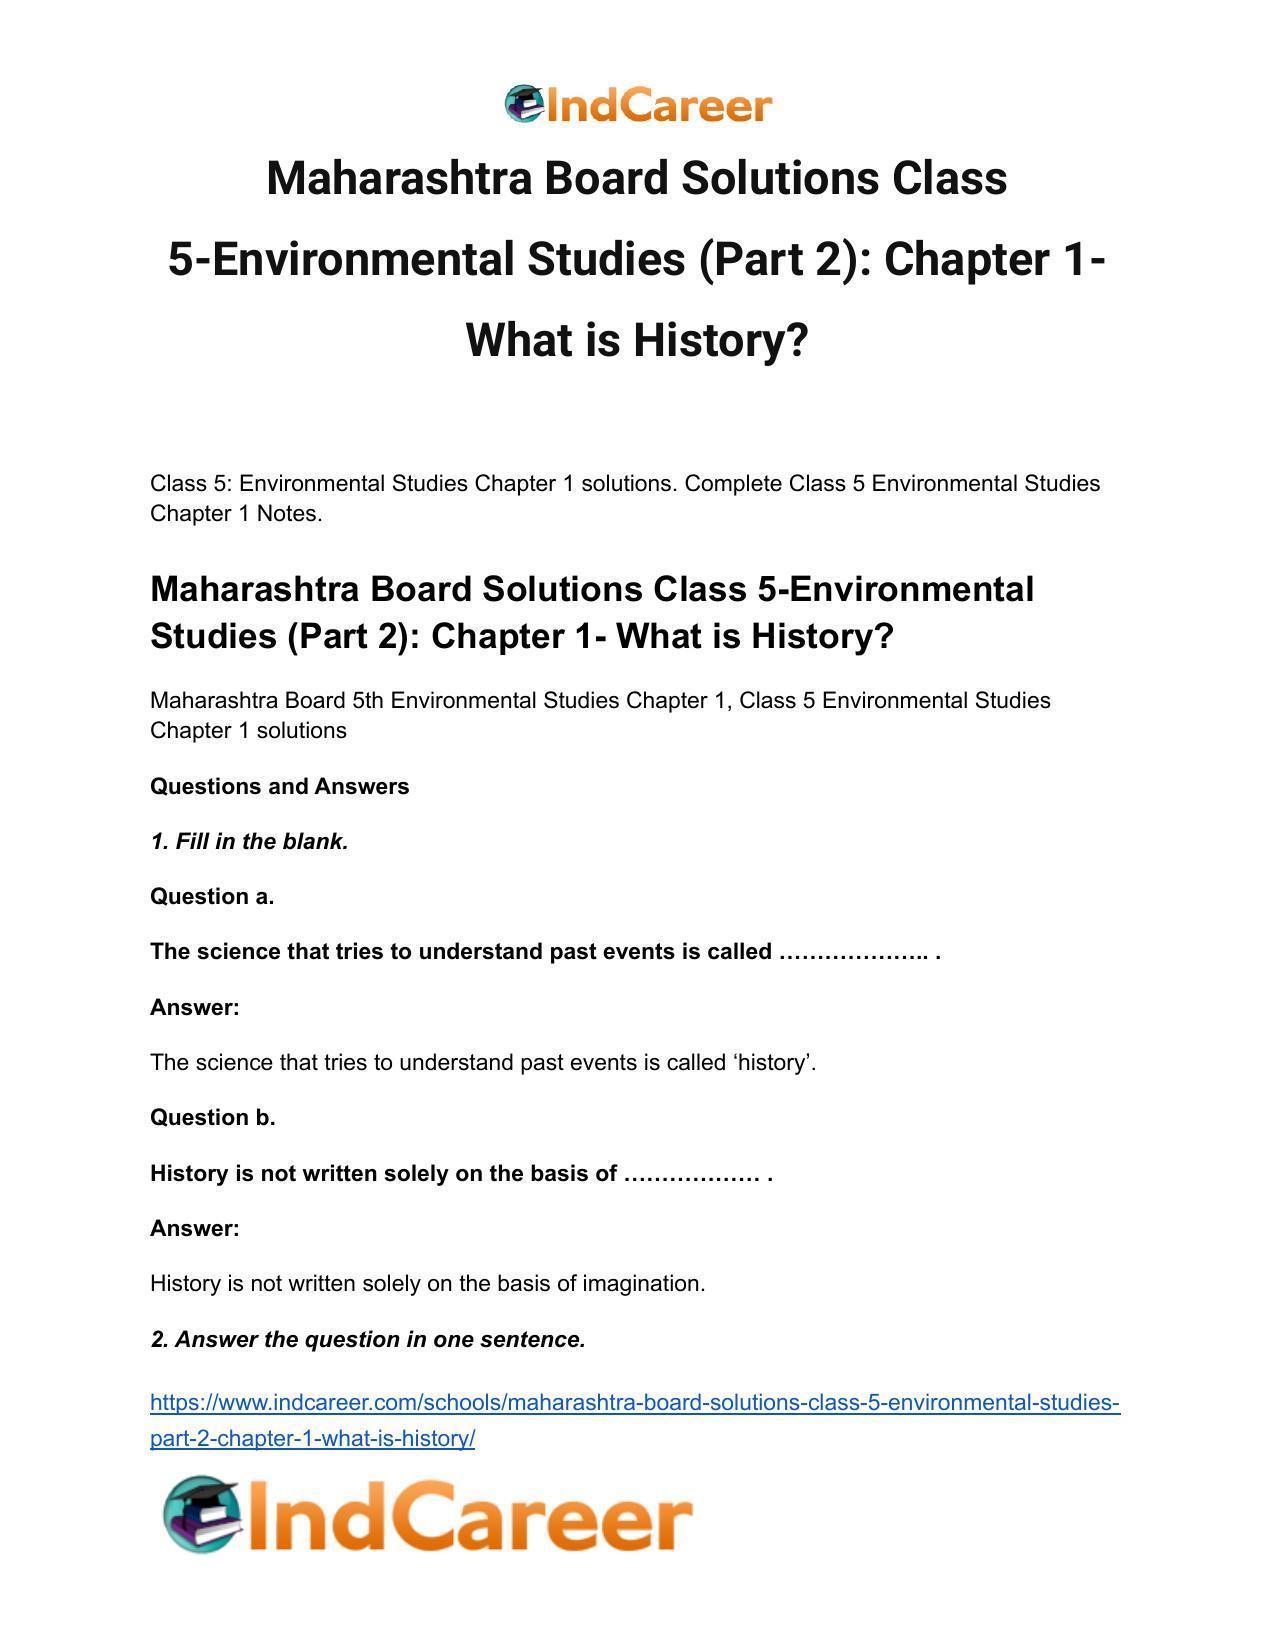 Maharashtra Board Solutions Class 5-Environmental Studies (Part 2): Chapter 1- What is History? - Page 2